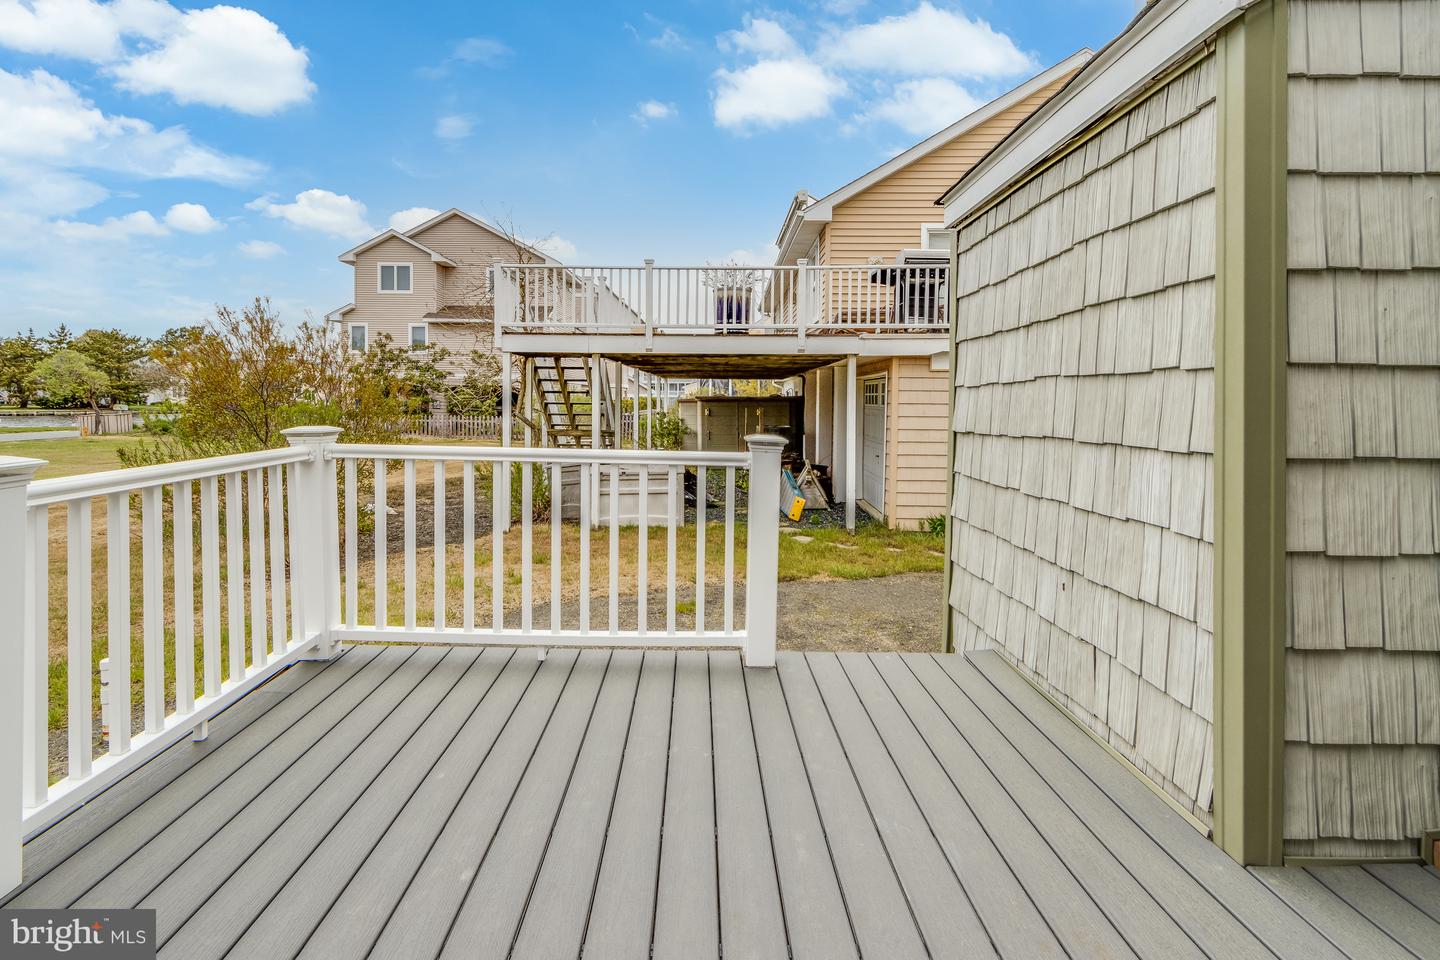 DESU2060190-803009596304-2024-04-21-00-08-04 35205 Hassell Ave | Bethany Beach, DE Real Estate For Sale | MLS# Desu2060190  - 1st Choice Properties